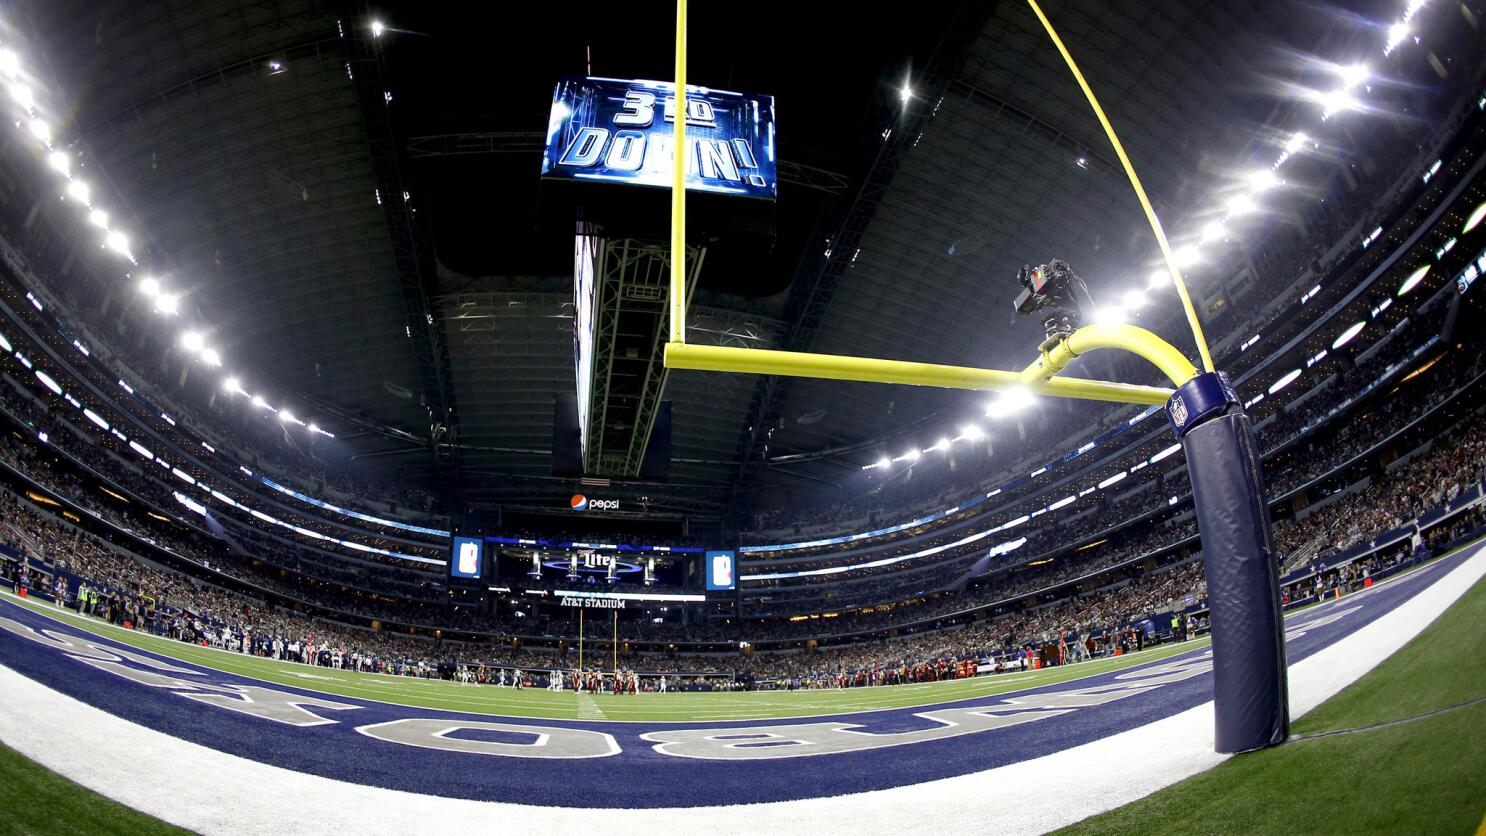 Going to a Dallas Cowboys game? Here's what you should know before heading  to AT&T Stadium